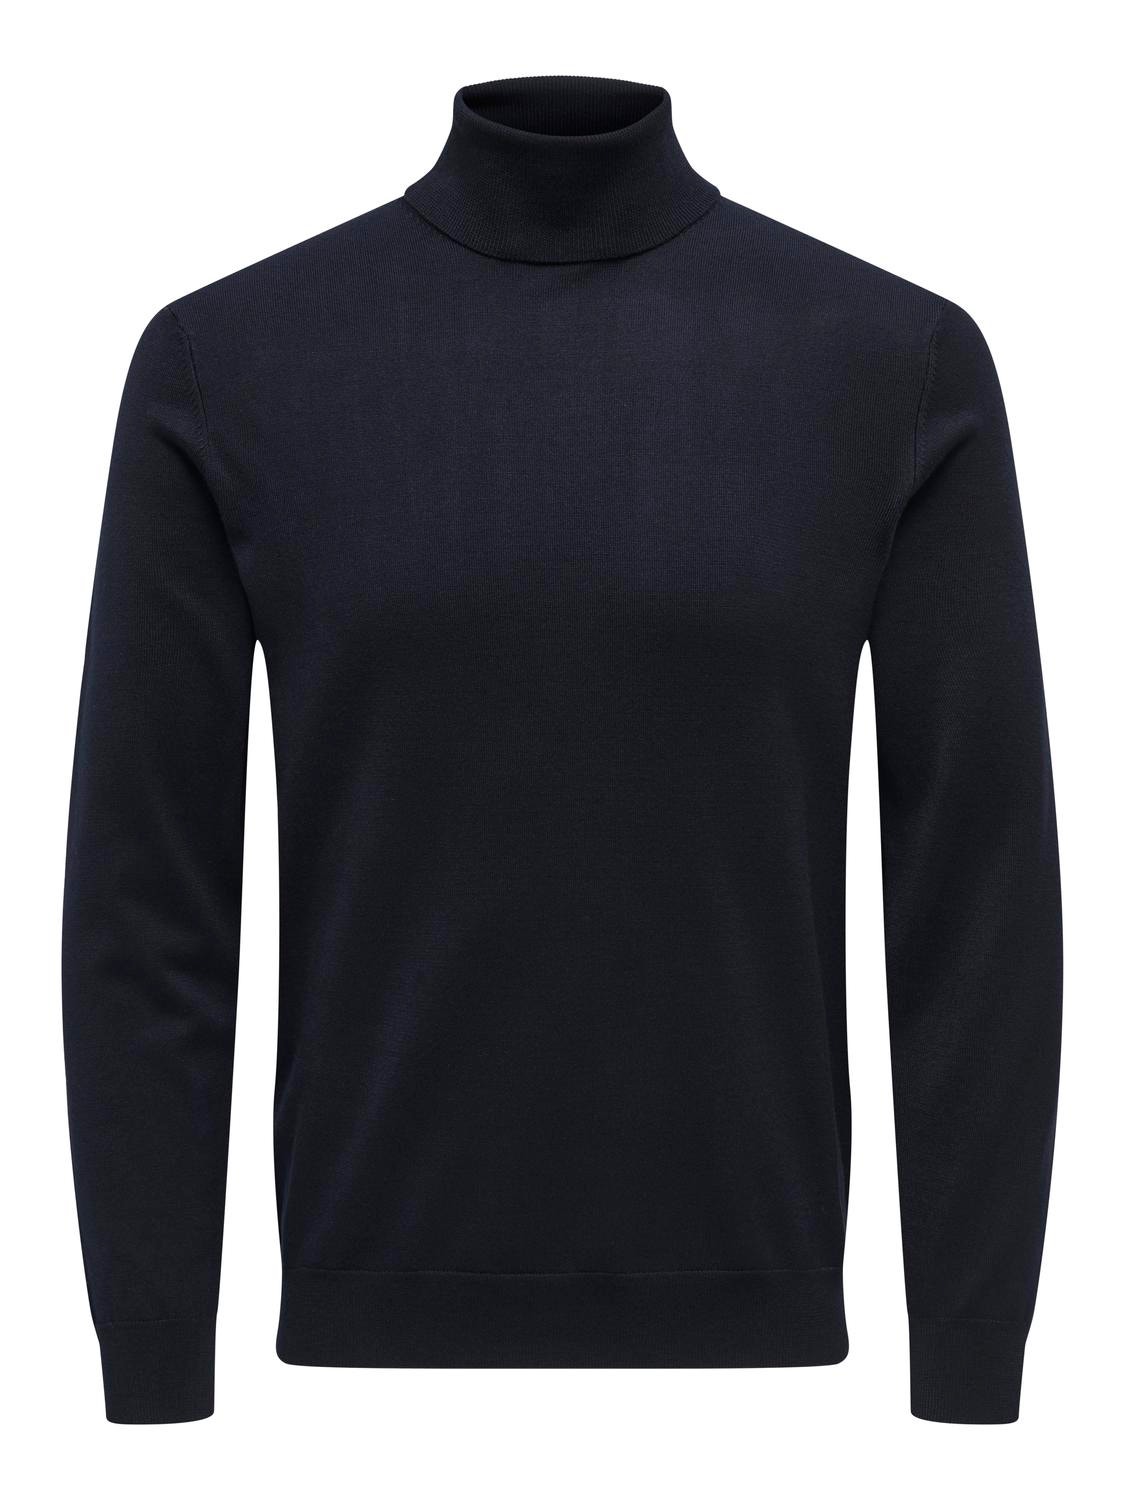 ONLY & SONS Polokrage Pullover -Dark Navy - 22020879